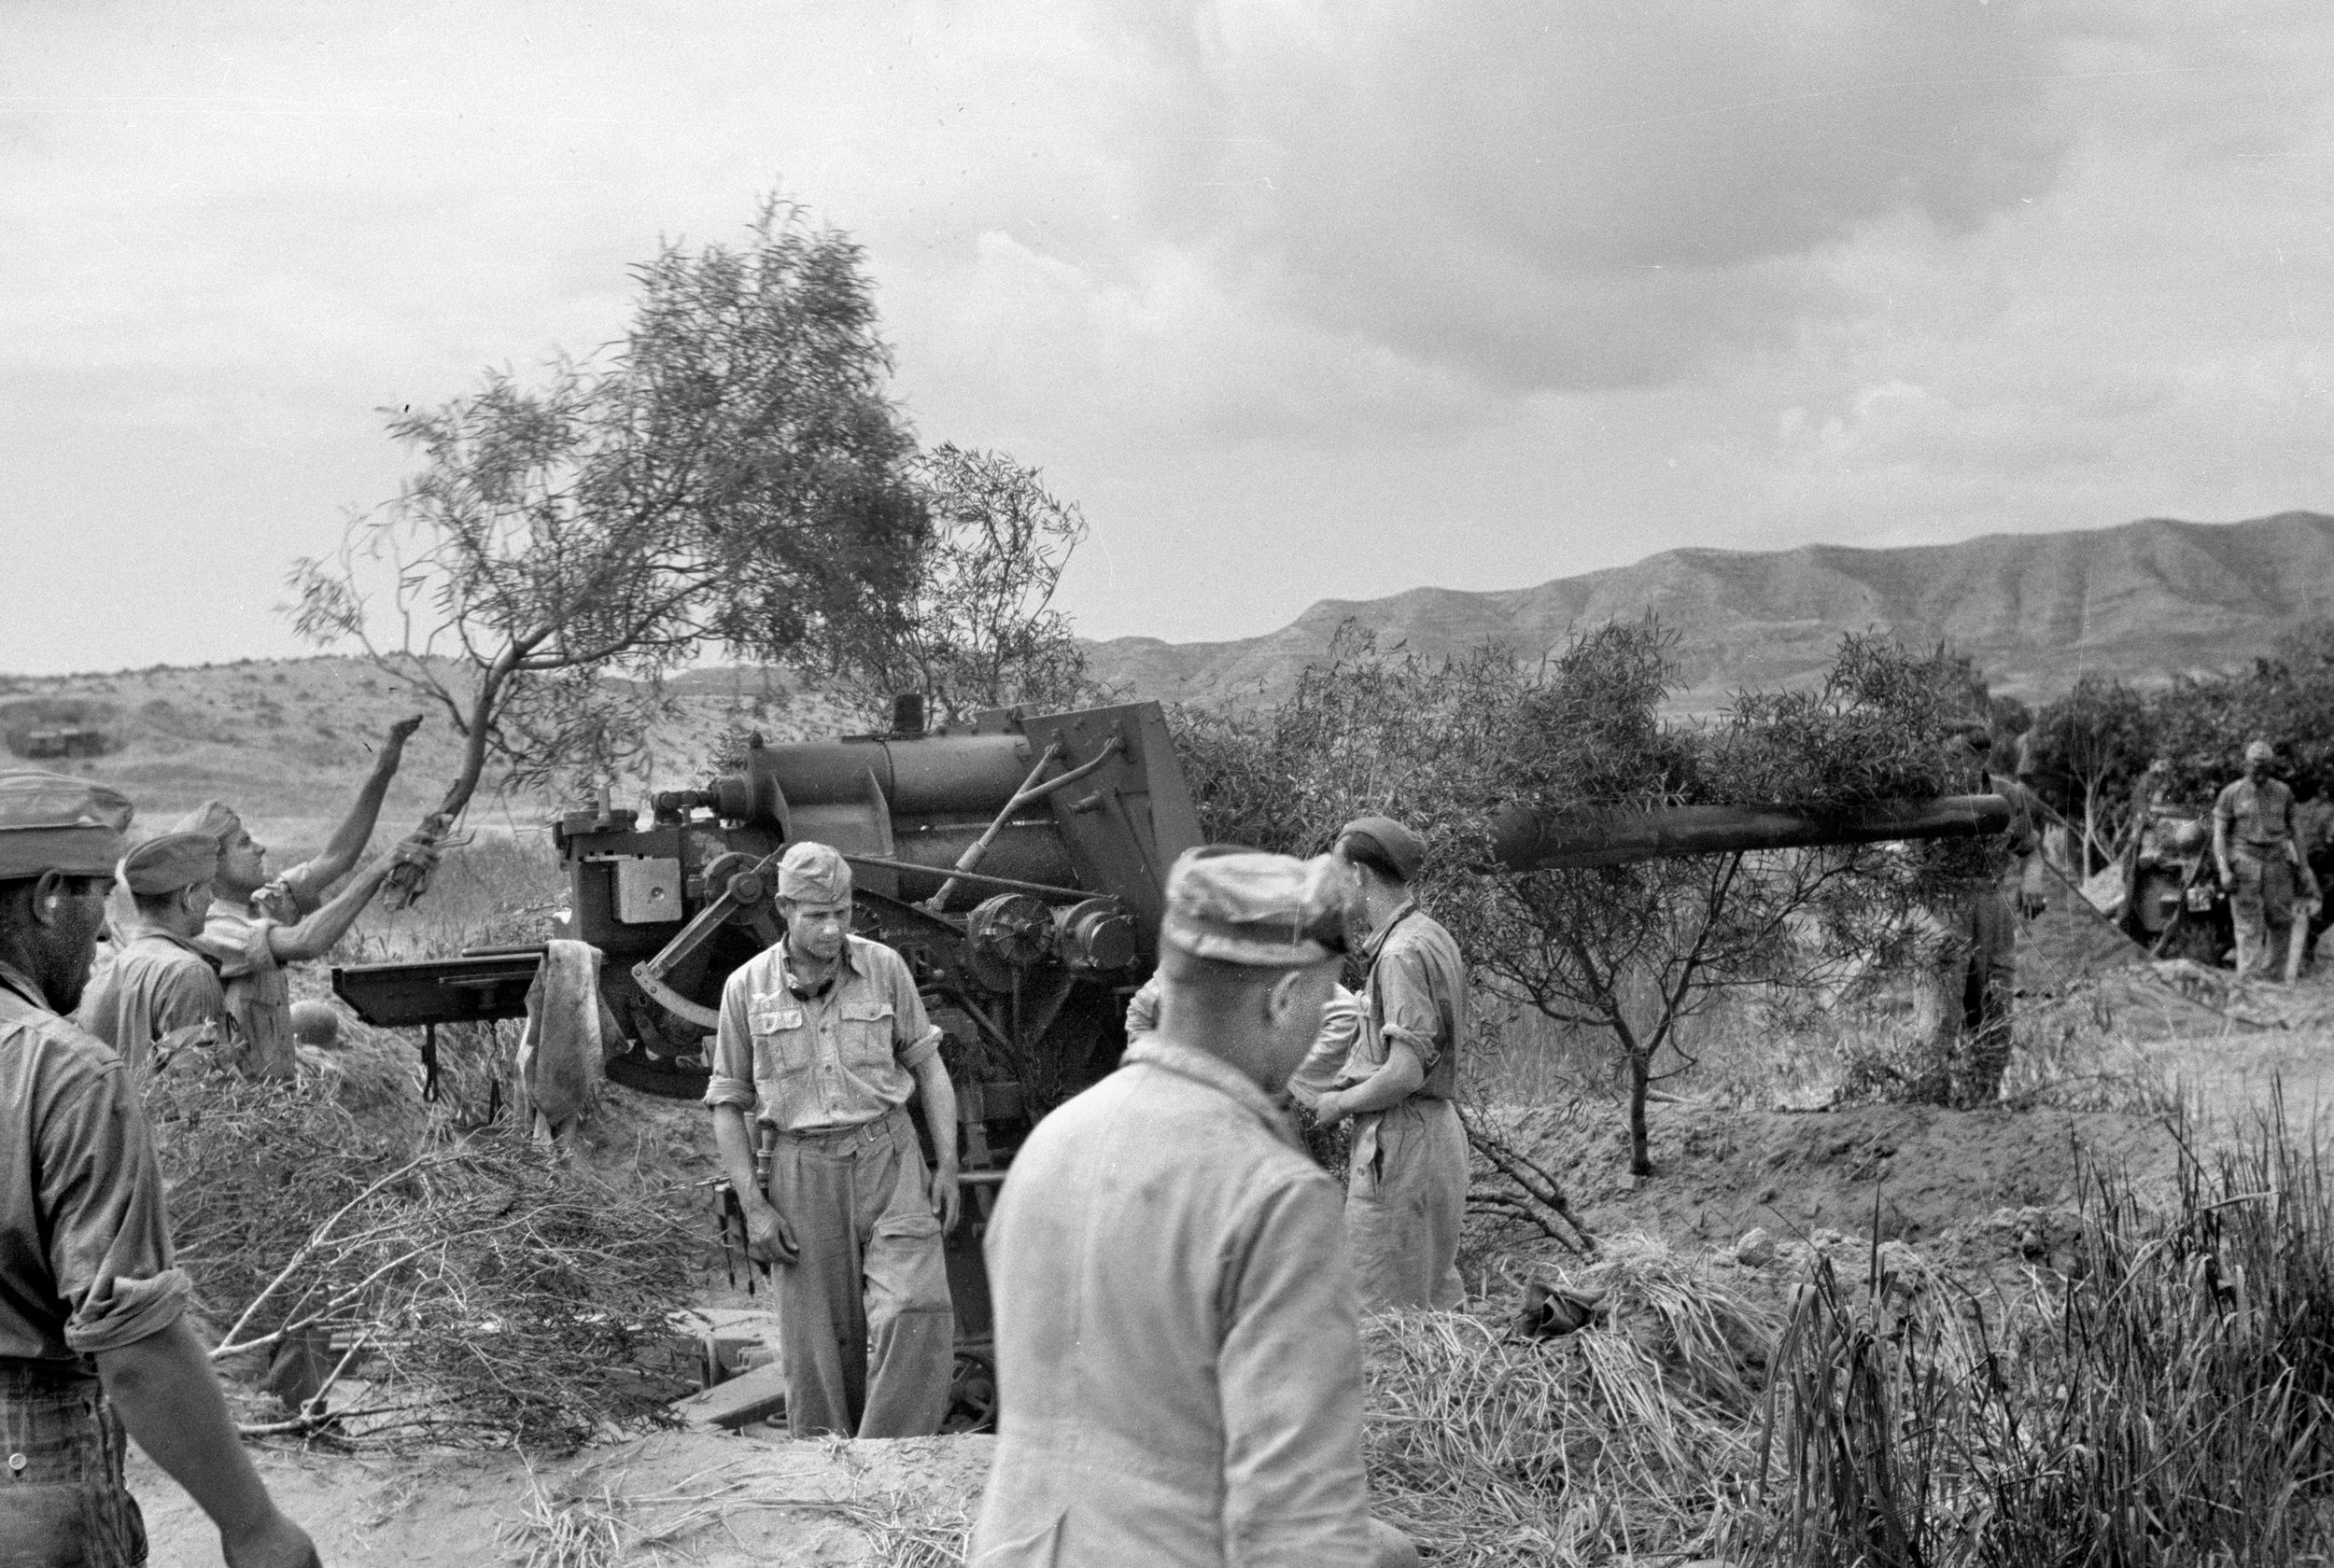 German soldiers camouflage an 88mm gun in the desert. The 88 was originally a flak gun but proved deadly against Allied armor in North Africa where Ernest Hollands and his Churchill tank narrowly avoided destruction from two of them in a matter of minutes.